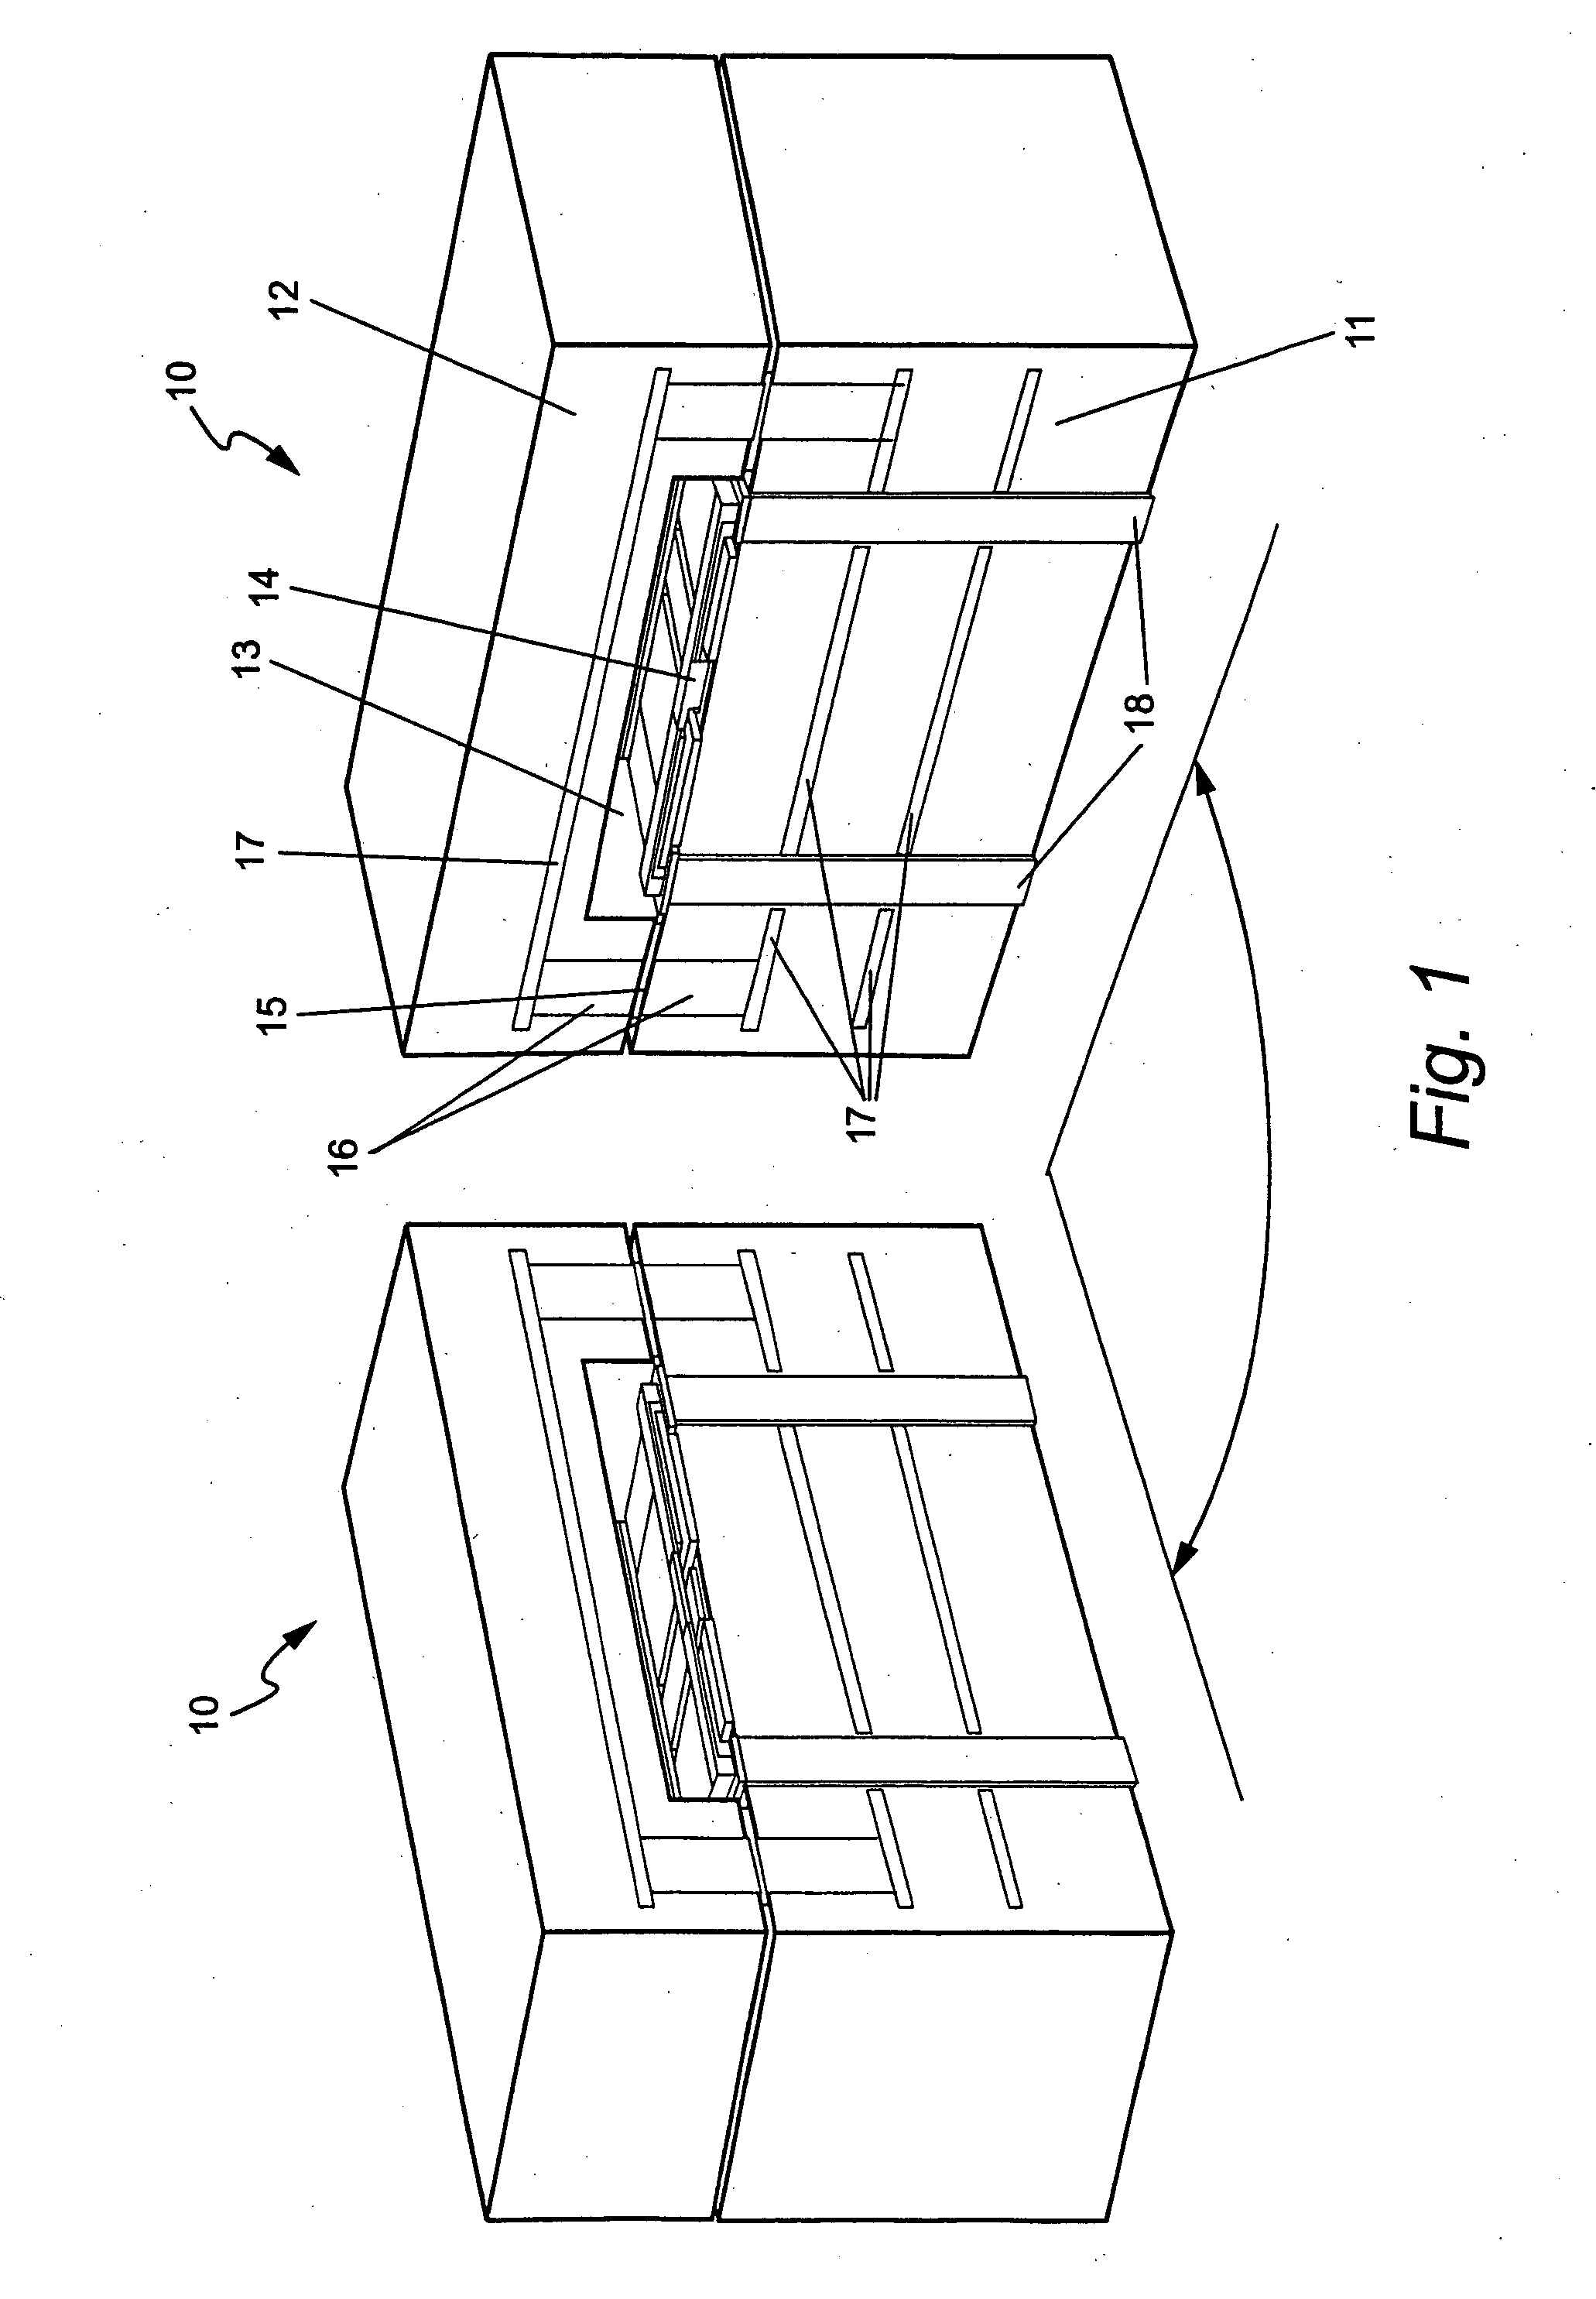 Method of fabricating radio frequency microelectromechanical systems (MEMS) devices on low-temperature co-fired ceramic (LTCC) substrates